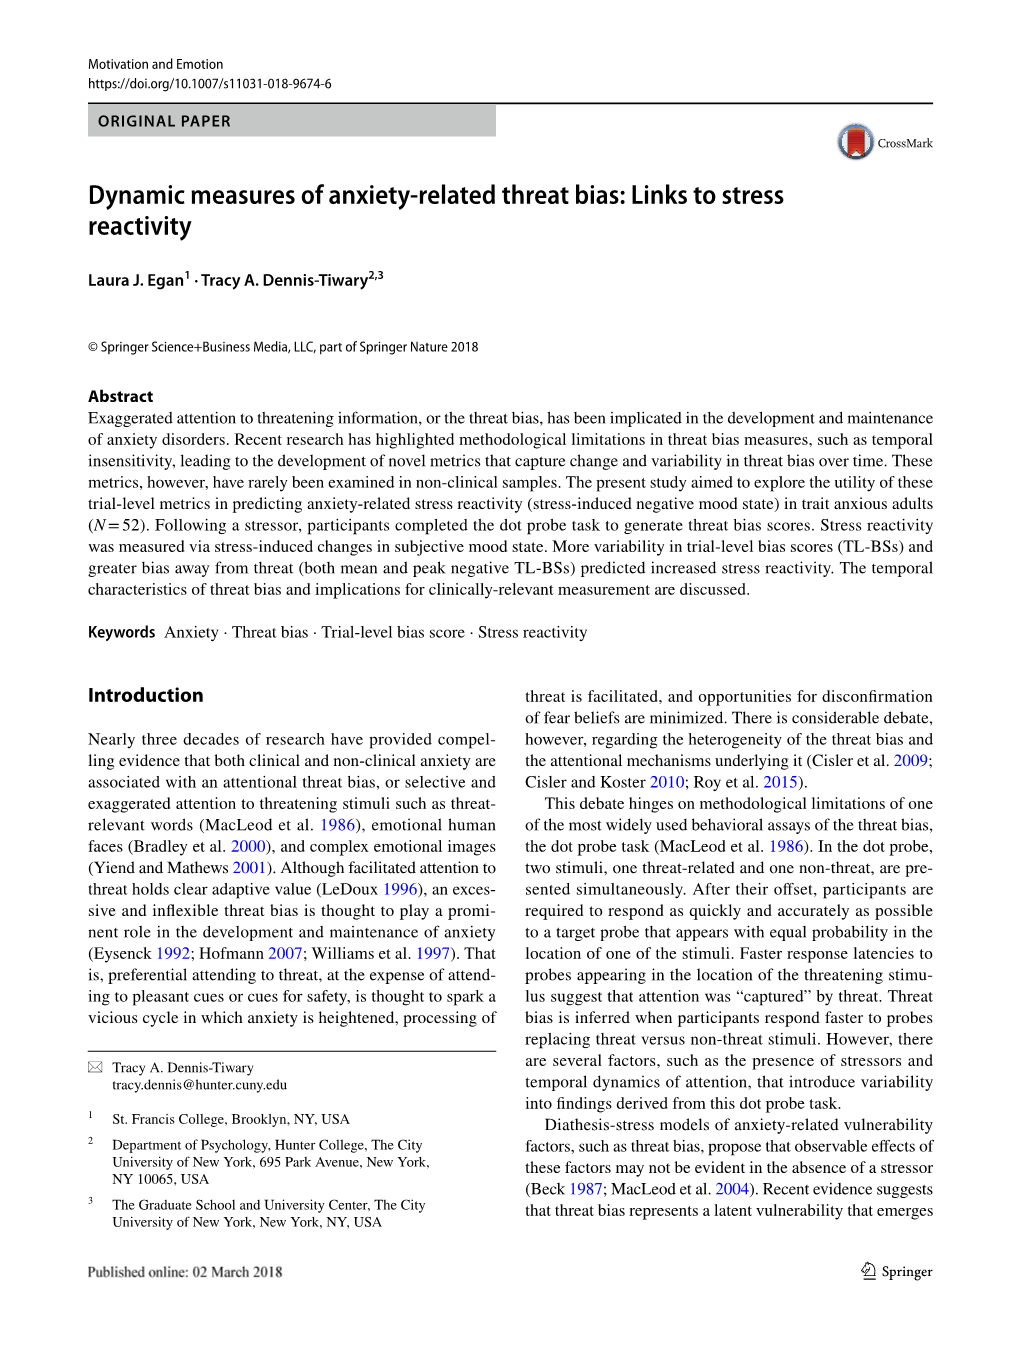 Dynamic Measures of Anxiety-Related Threat Bias: Links to Stress Reactivity